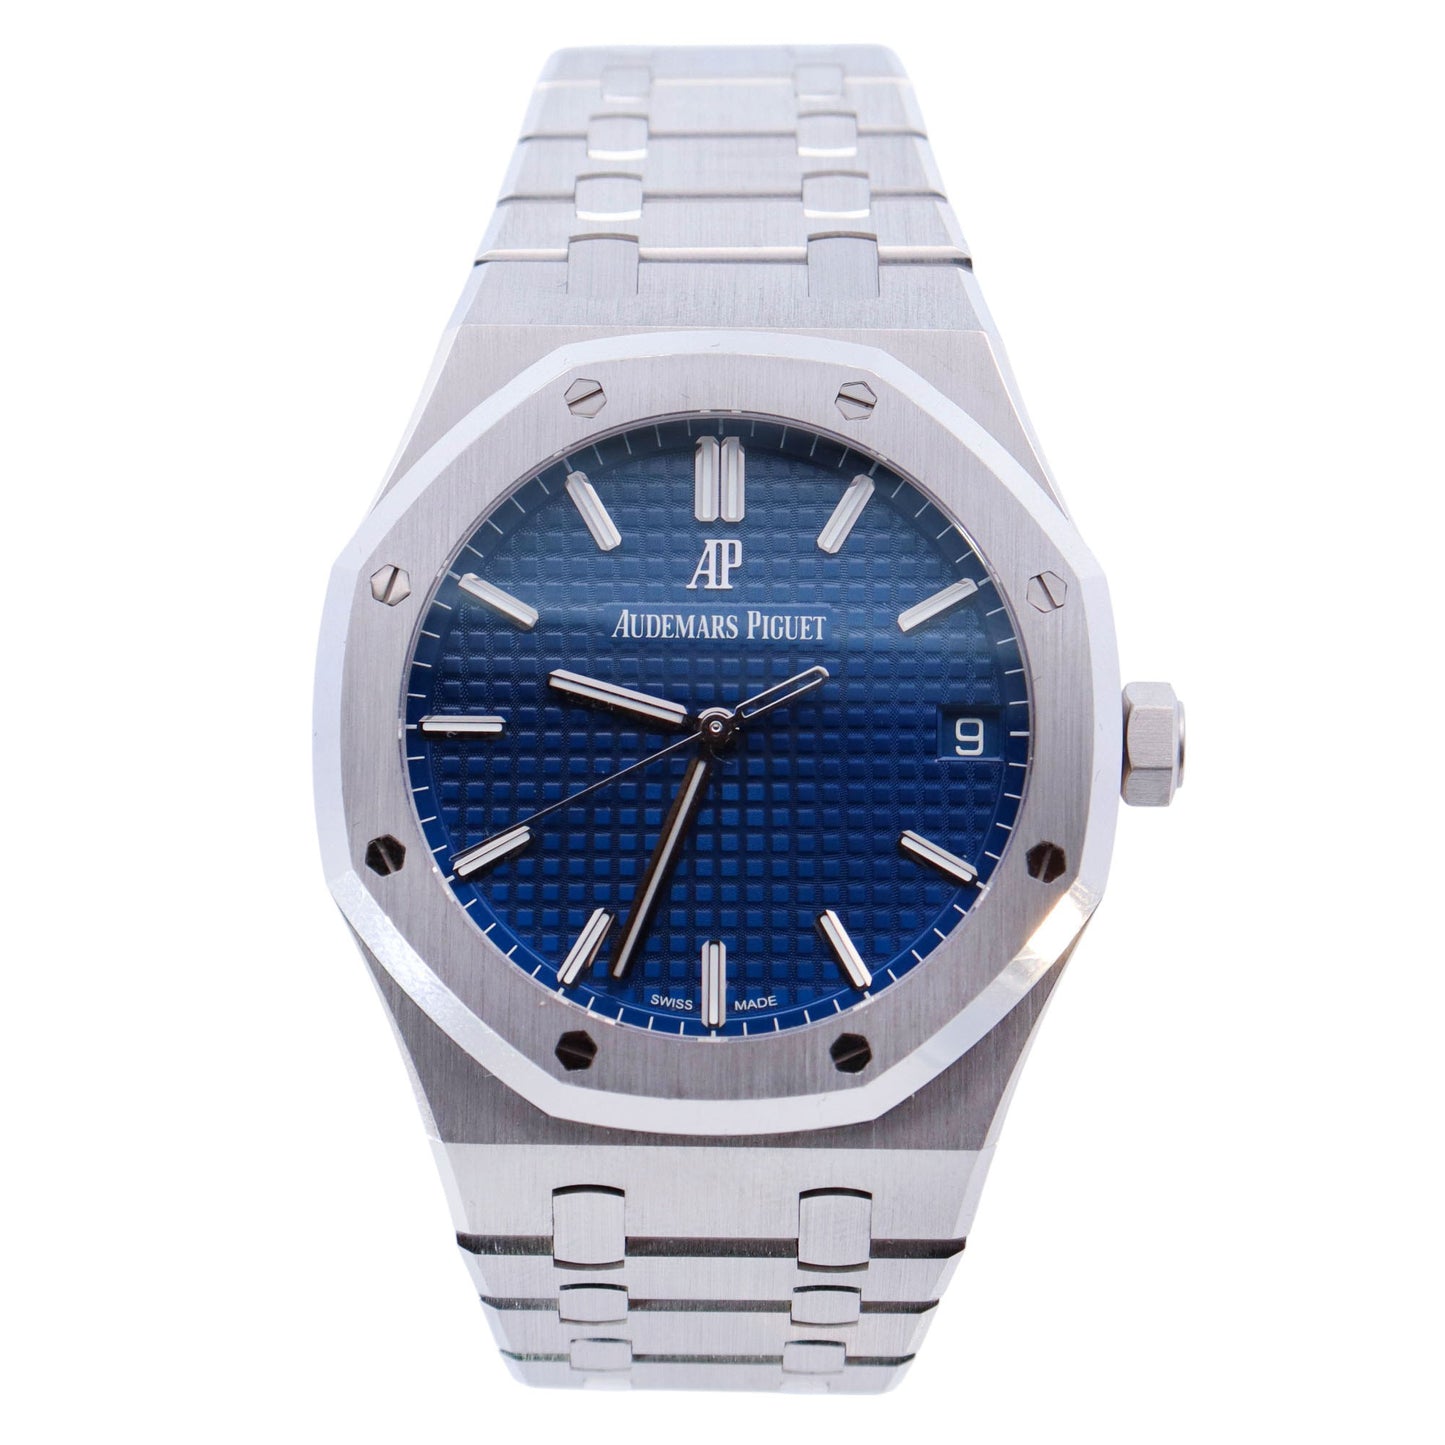 Audemars Piguet Royal Oak "Japan Edition" White Gold 41mm Blue Stick Dial Watch Reference# 15503BC.OO.1220BC.01